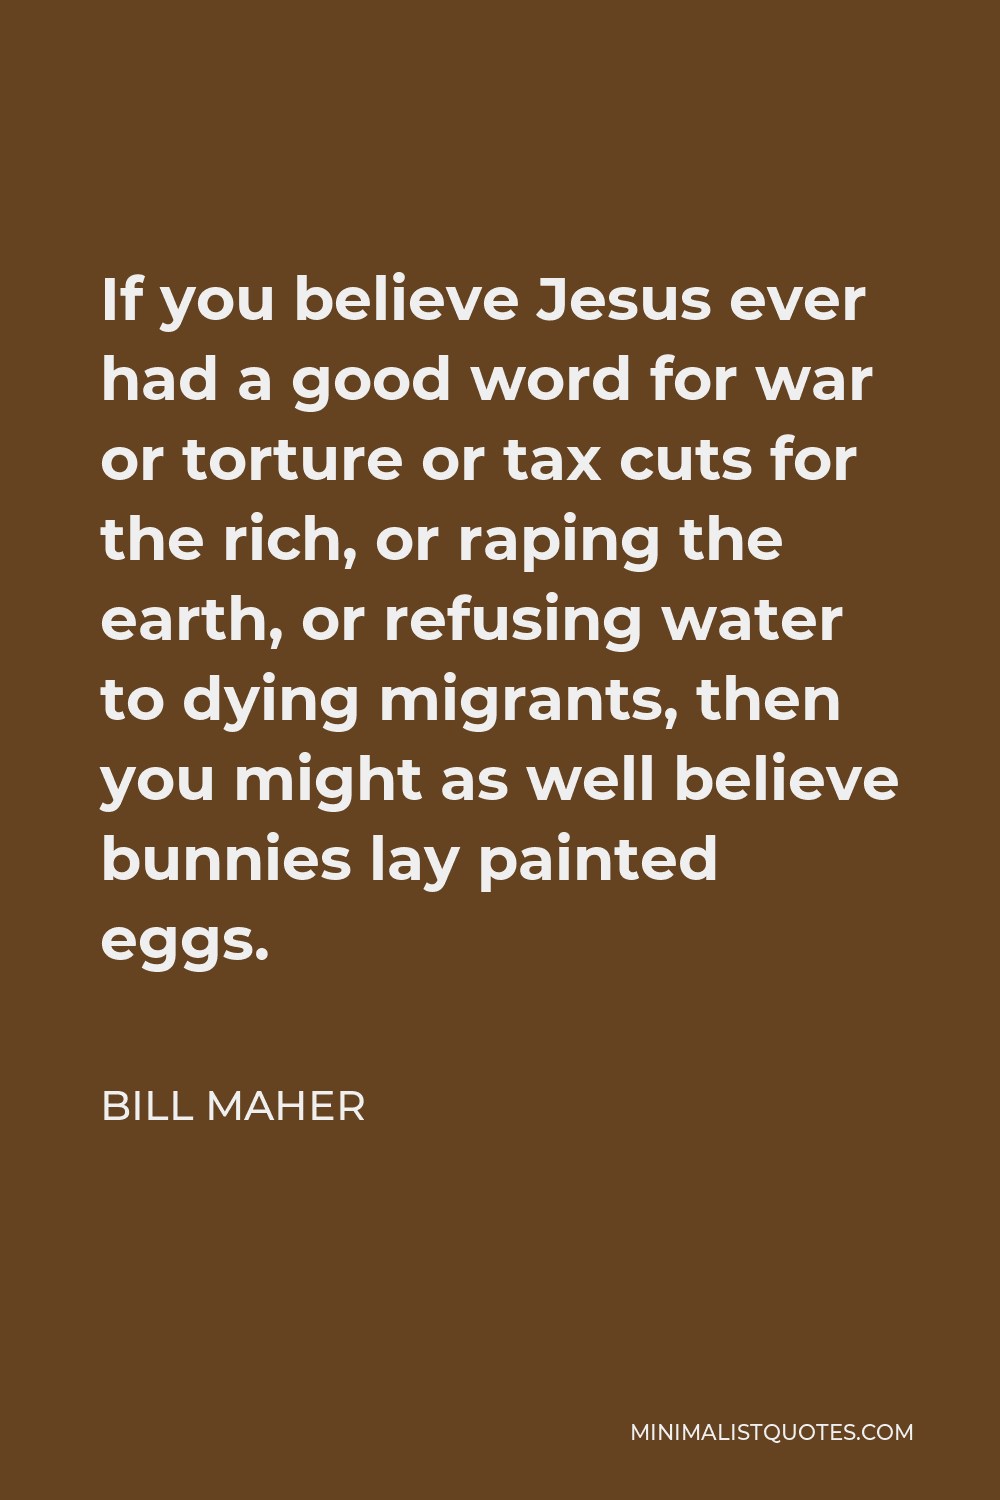 Bill Maher Quote - If you believe Jesus ever had a good word for war or torture or tax cuts for the rich, or raping the earth, or refusing water to dying migrants, then you might as well believe bunnies lay painted eggs.